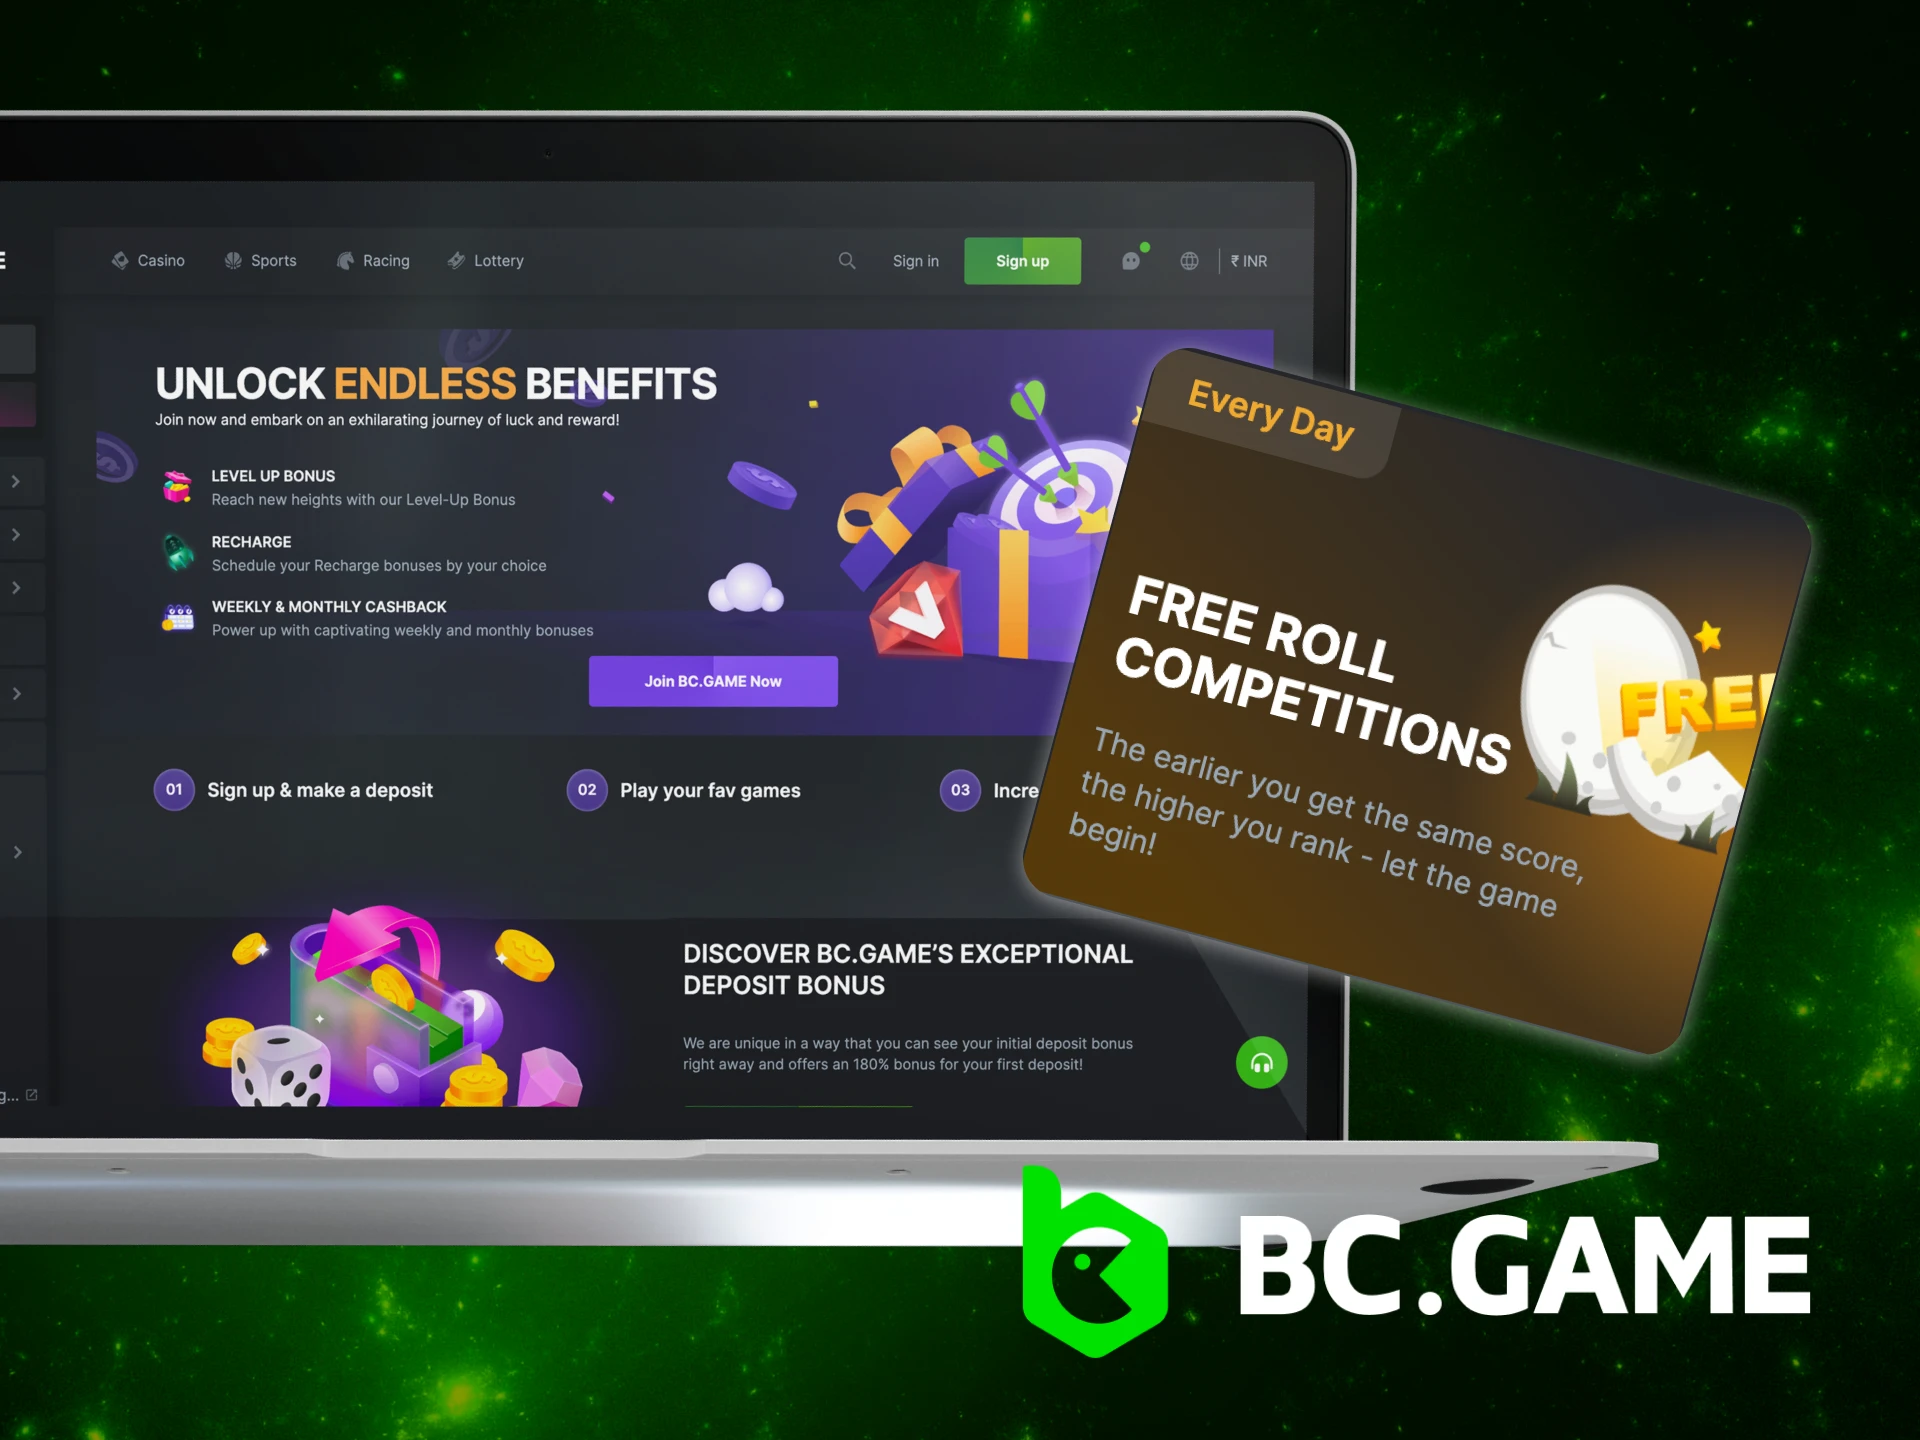 BC Game Roll Competition bonus information.